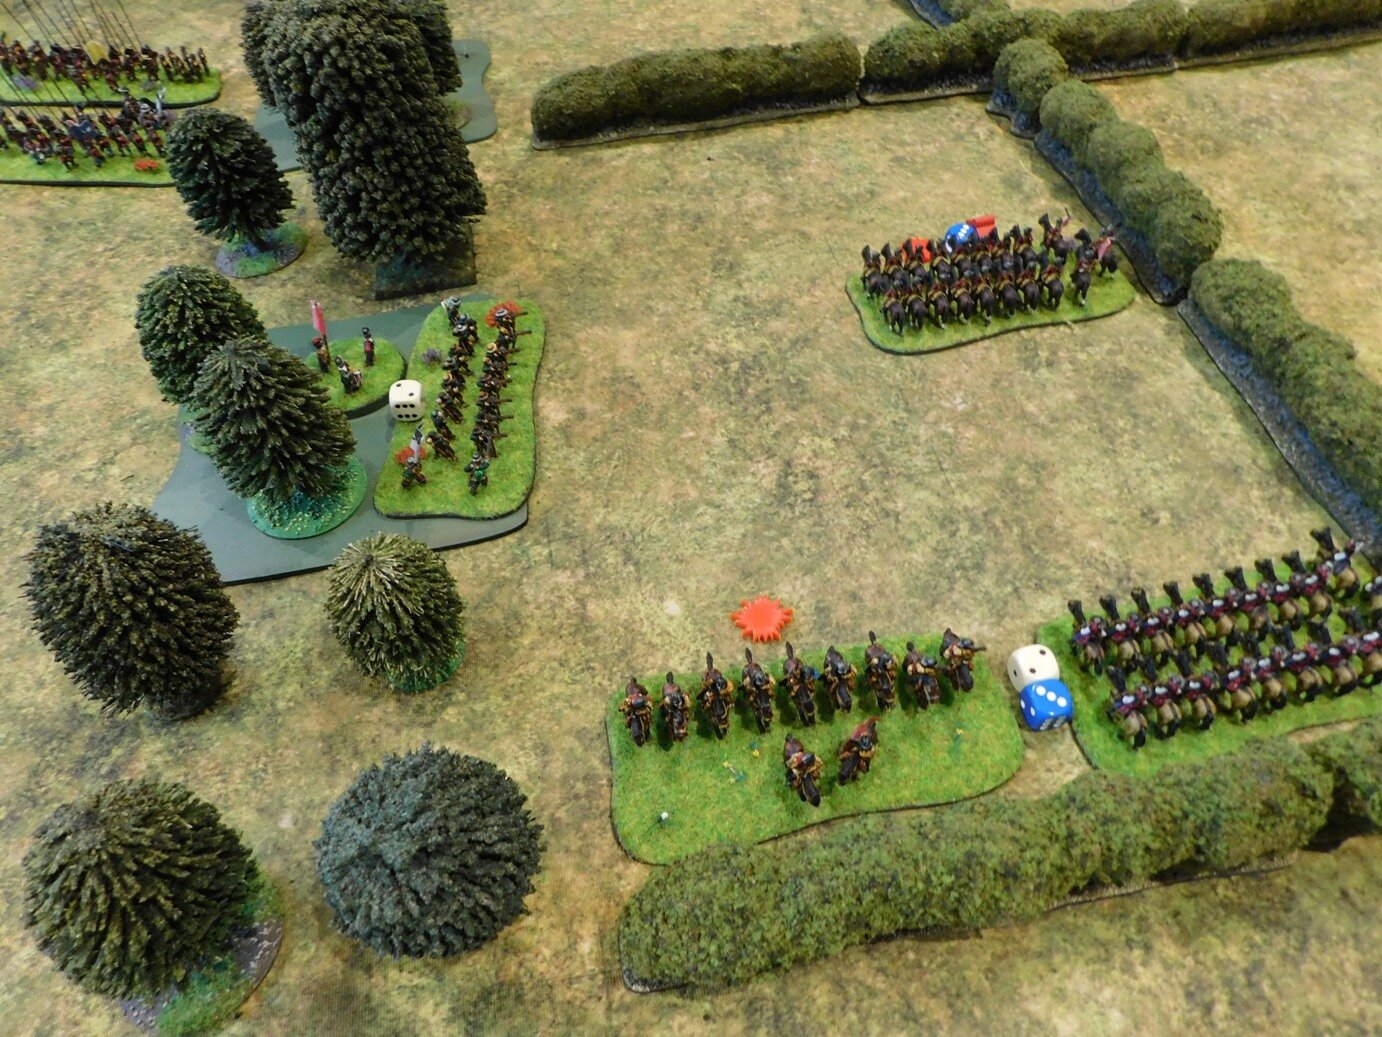 My Commanded Shot battalia blow a unit of Royalist cavalry away!